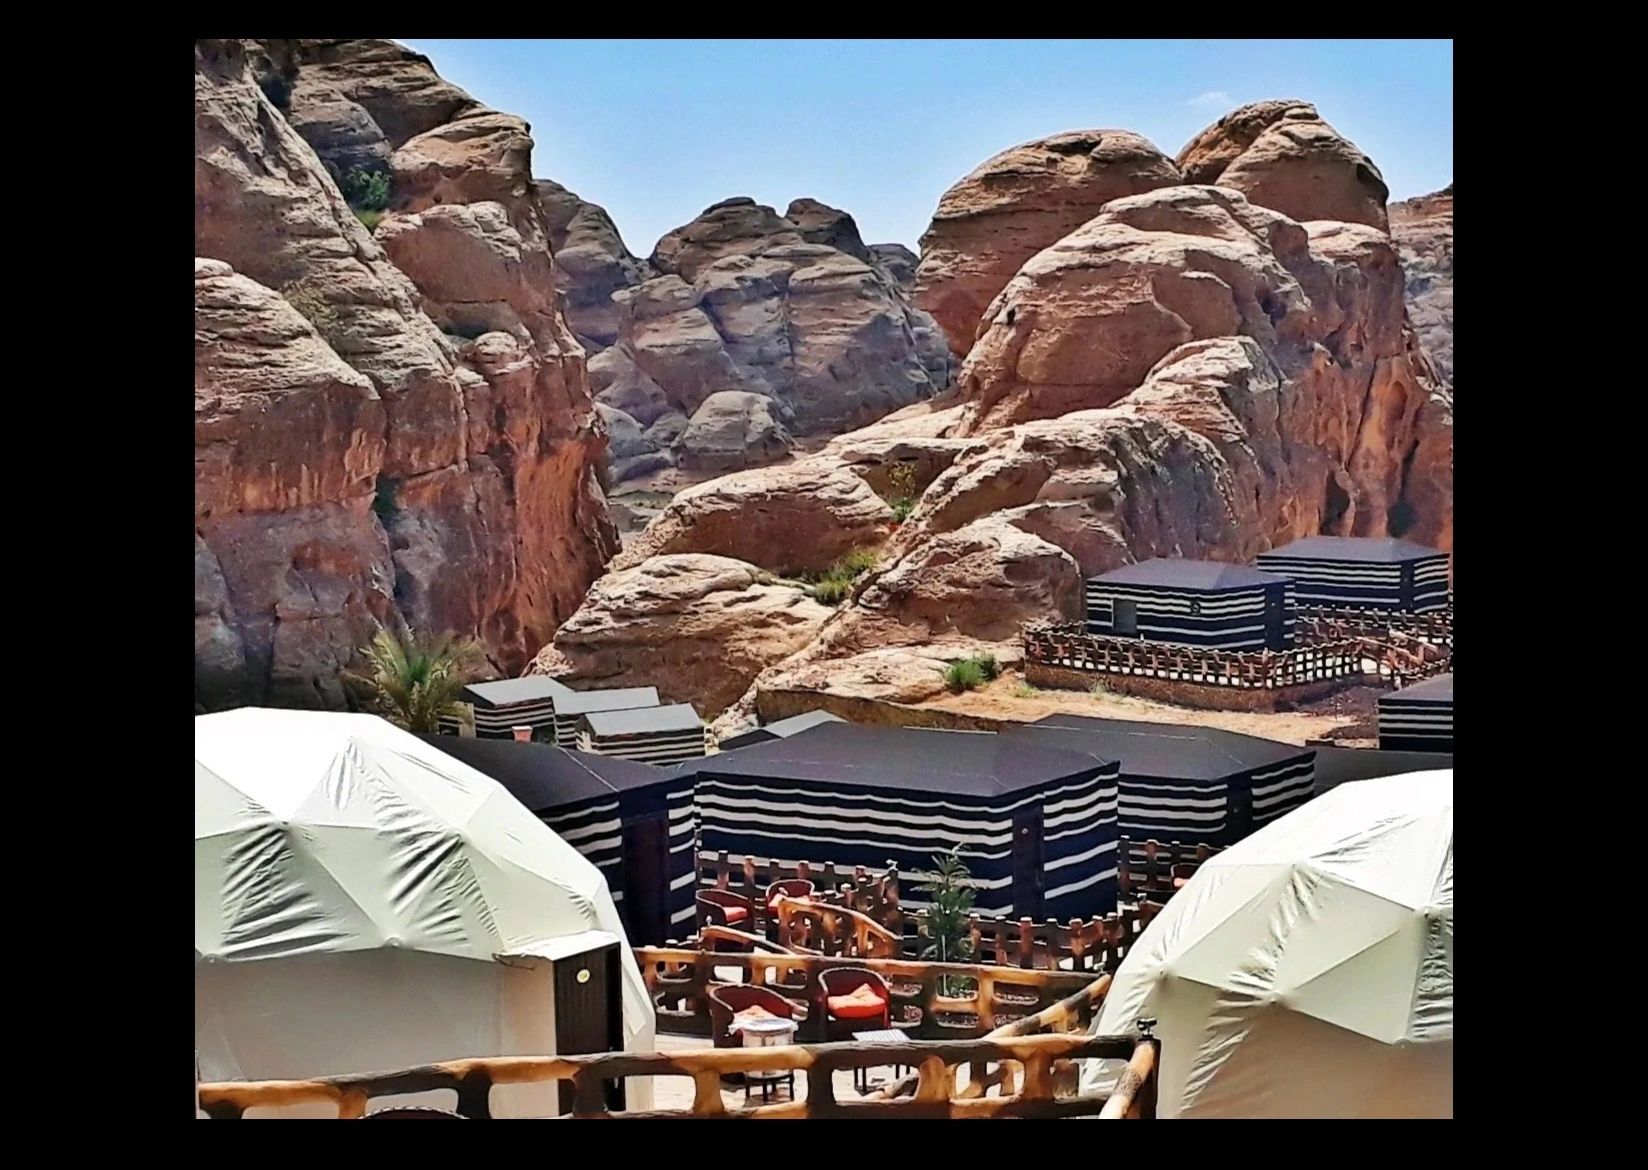 Dome Tents, Bubbles, and Cabins at the Seven Wonders Luxury Camp in Little Petra, close to Petra.